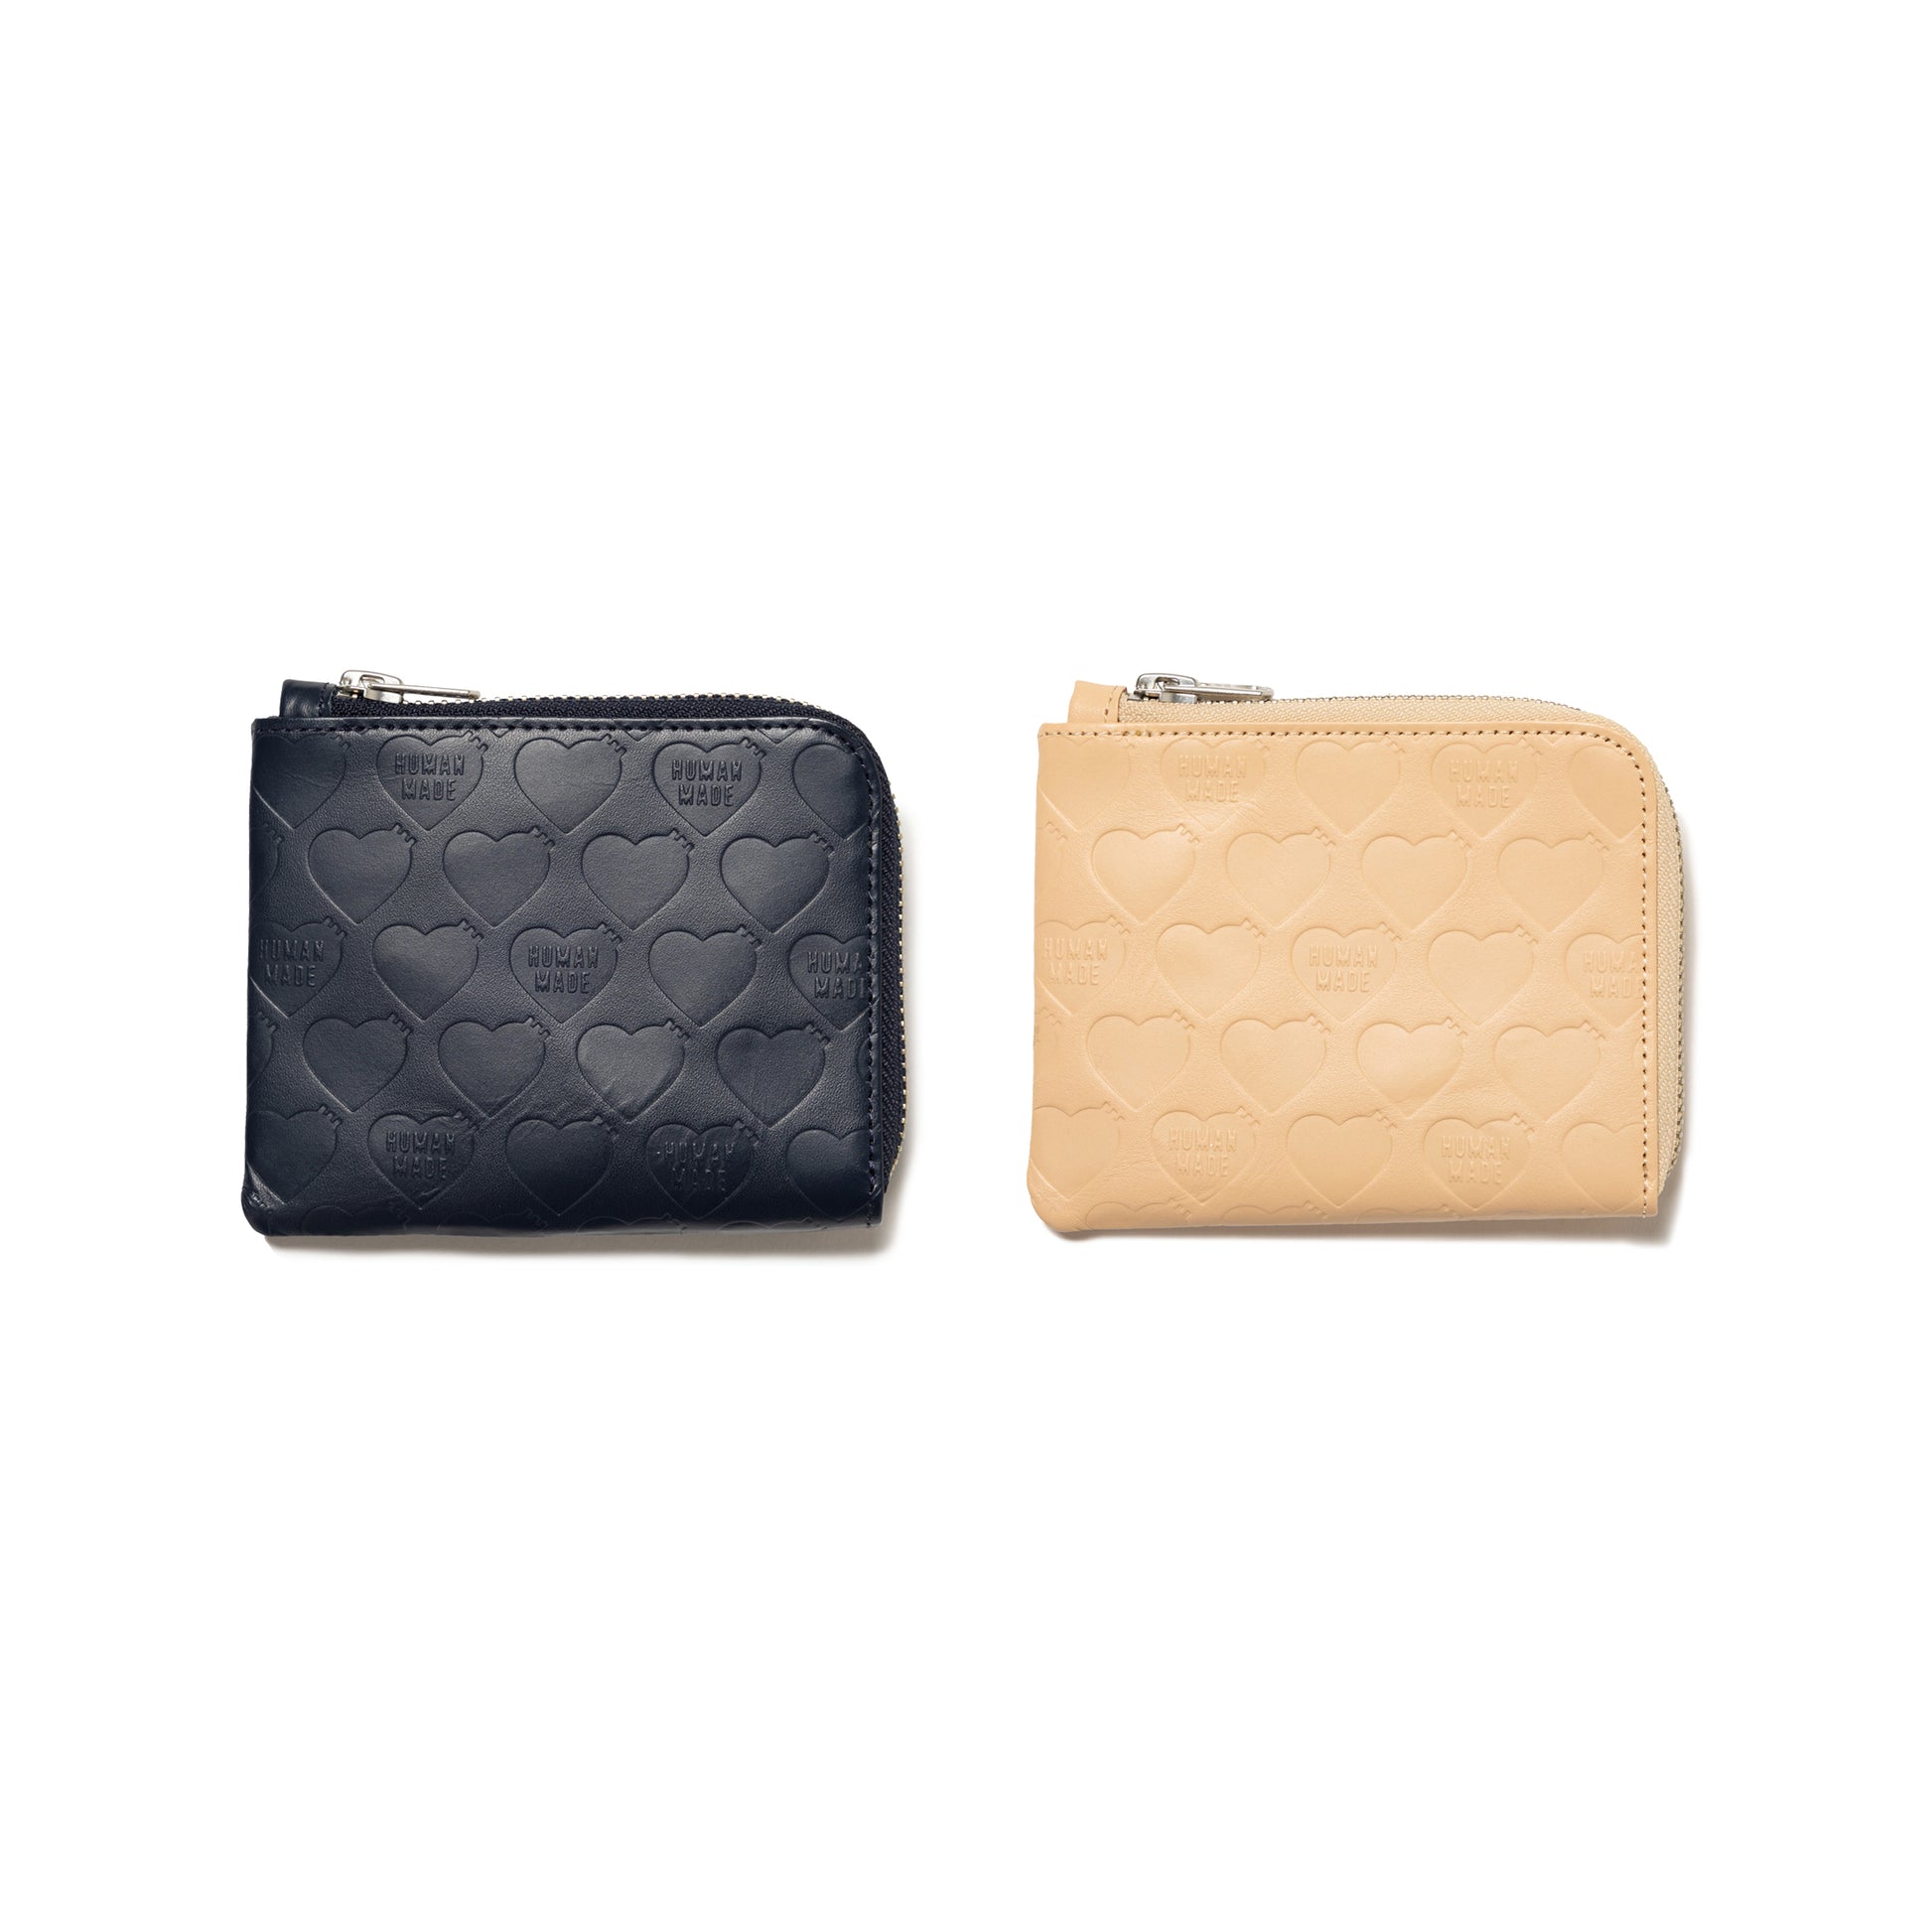 humanmadeHUMAN MADE HEART LEATHER WALLET NAVY